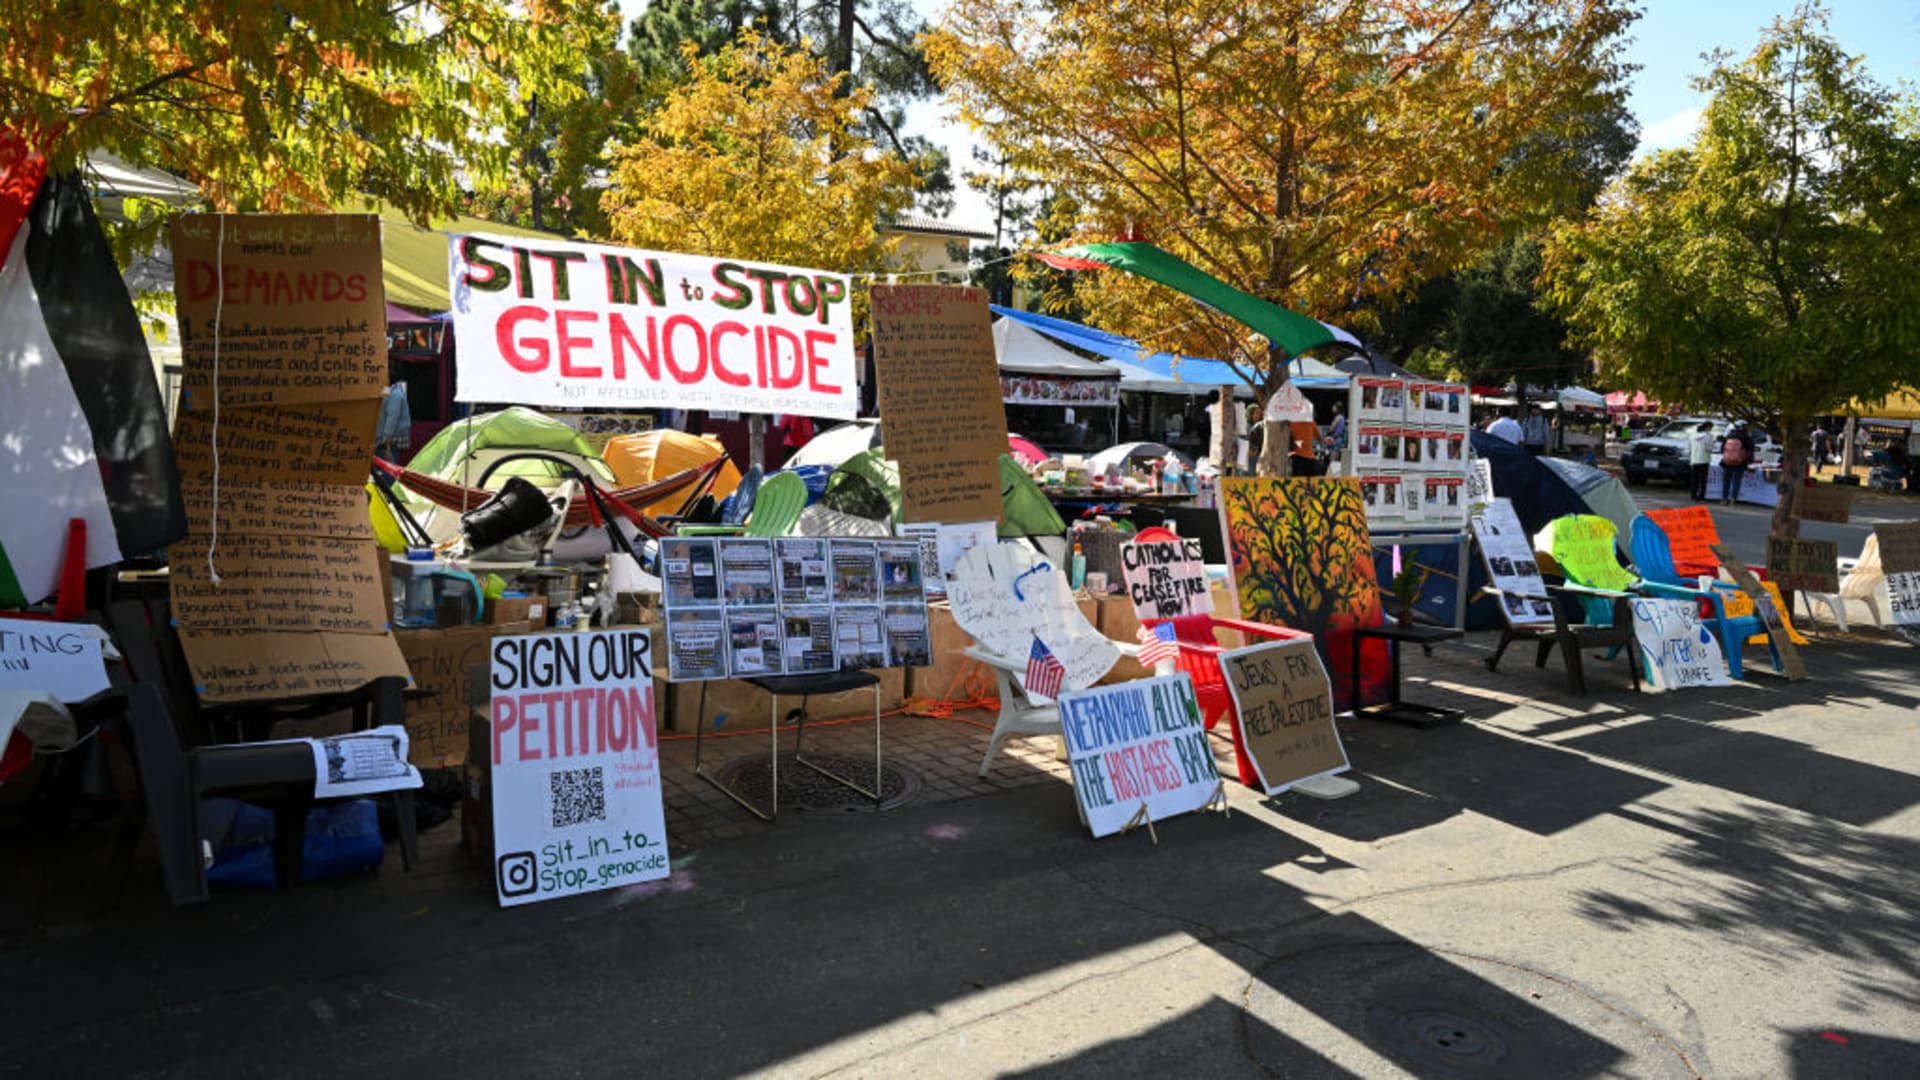 A view of encampment of students who have been sit-in on campus for 19 days at any given time and say they plan to do so until the university meets their demands, calling for the university to condemn Israeli attacks on Gaza, at White Plaza of Stanford University in Stanford, California, United States on November 7, 2023.